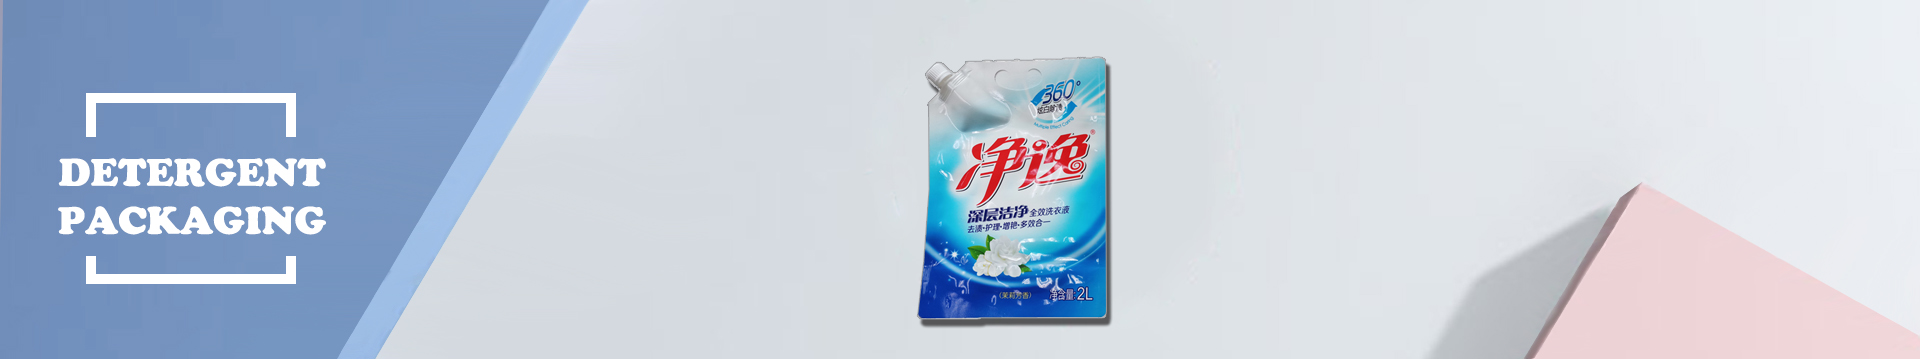 category-detergent bags-Yucai-img